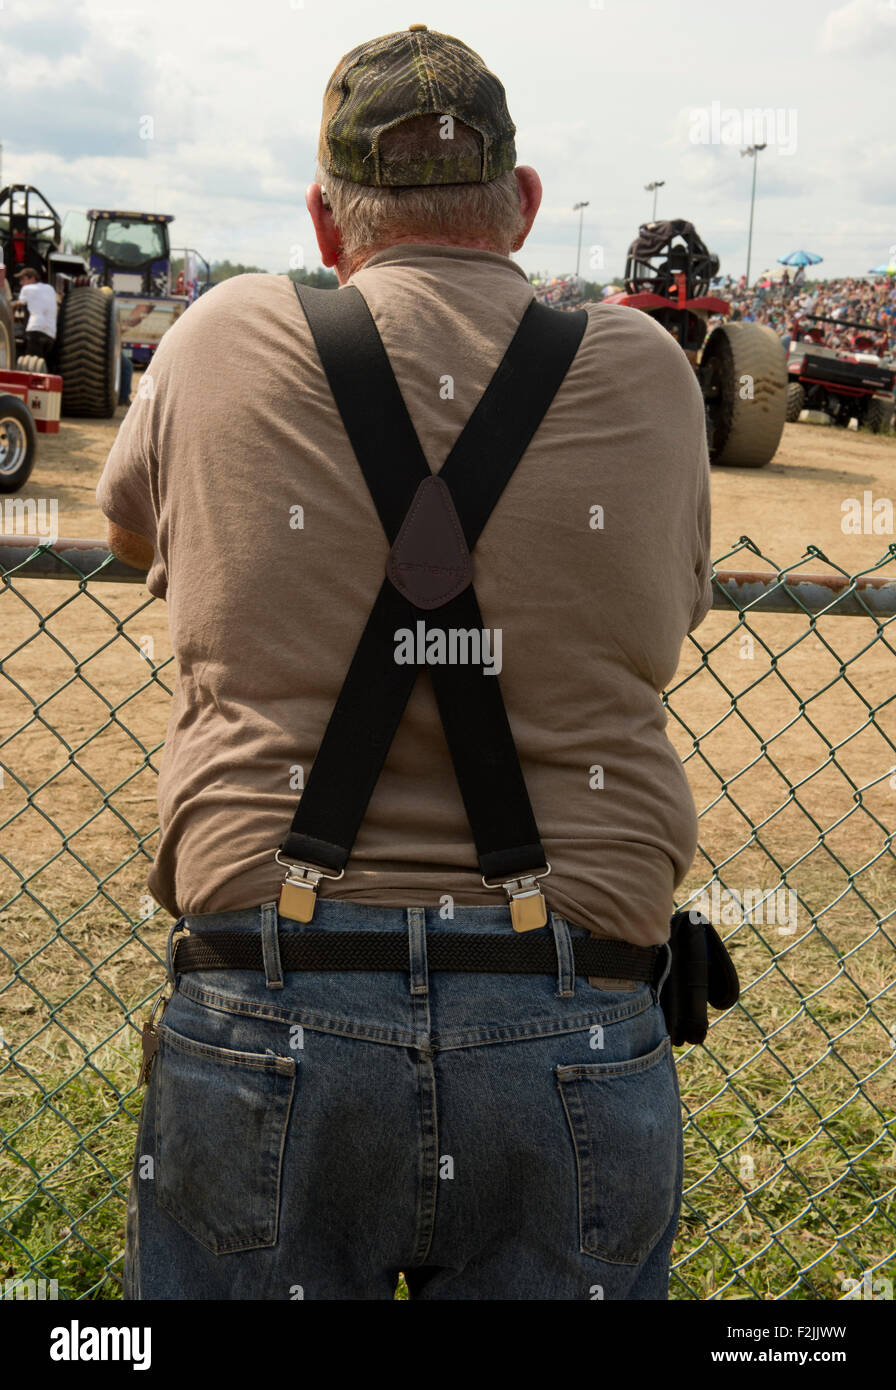 A man wearing suspenders and jeans watching the tractor pulling event at  the Washington County Fair in Greenwich, New York State Stock Photo - Alamy